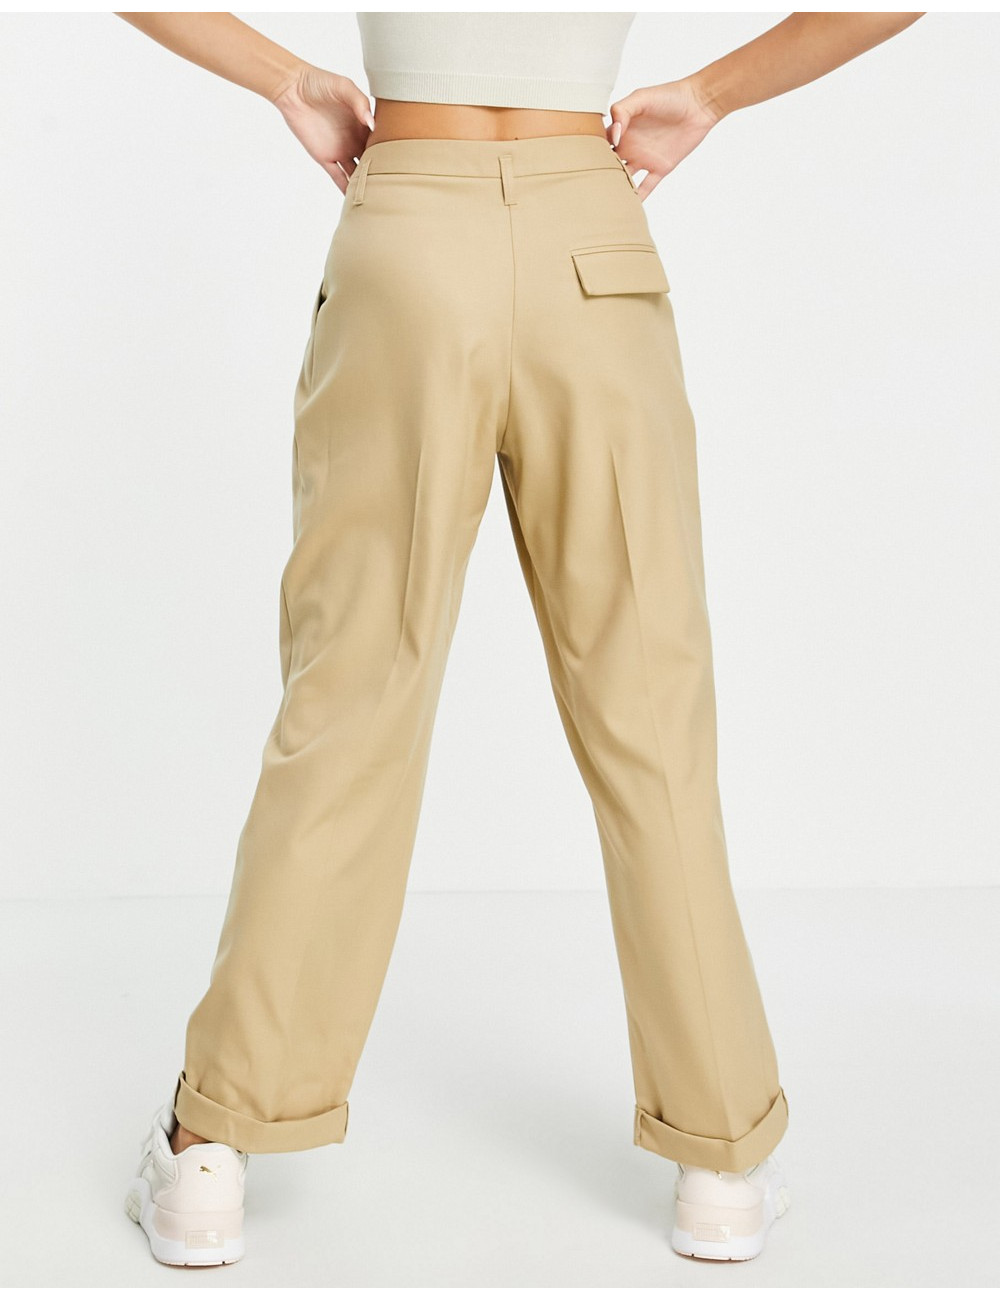 Topshop menzy trouser in camel